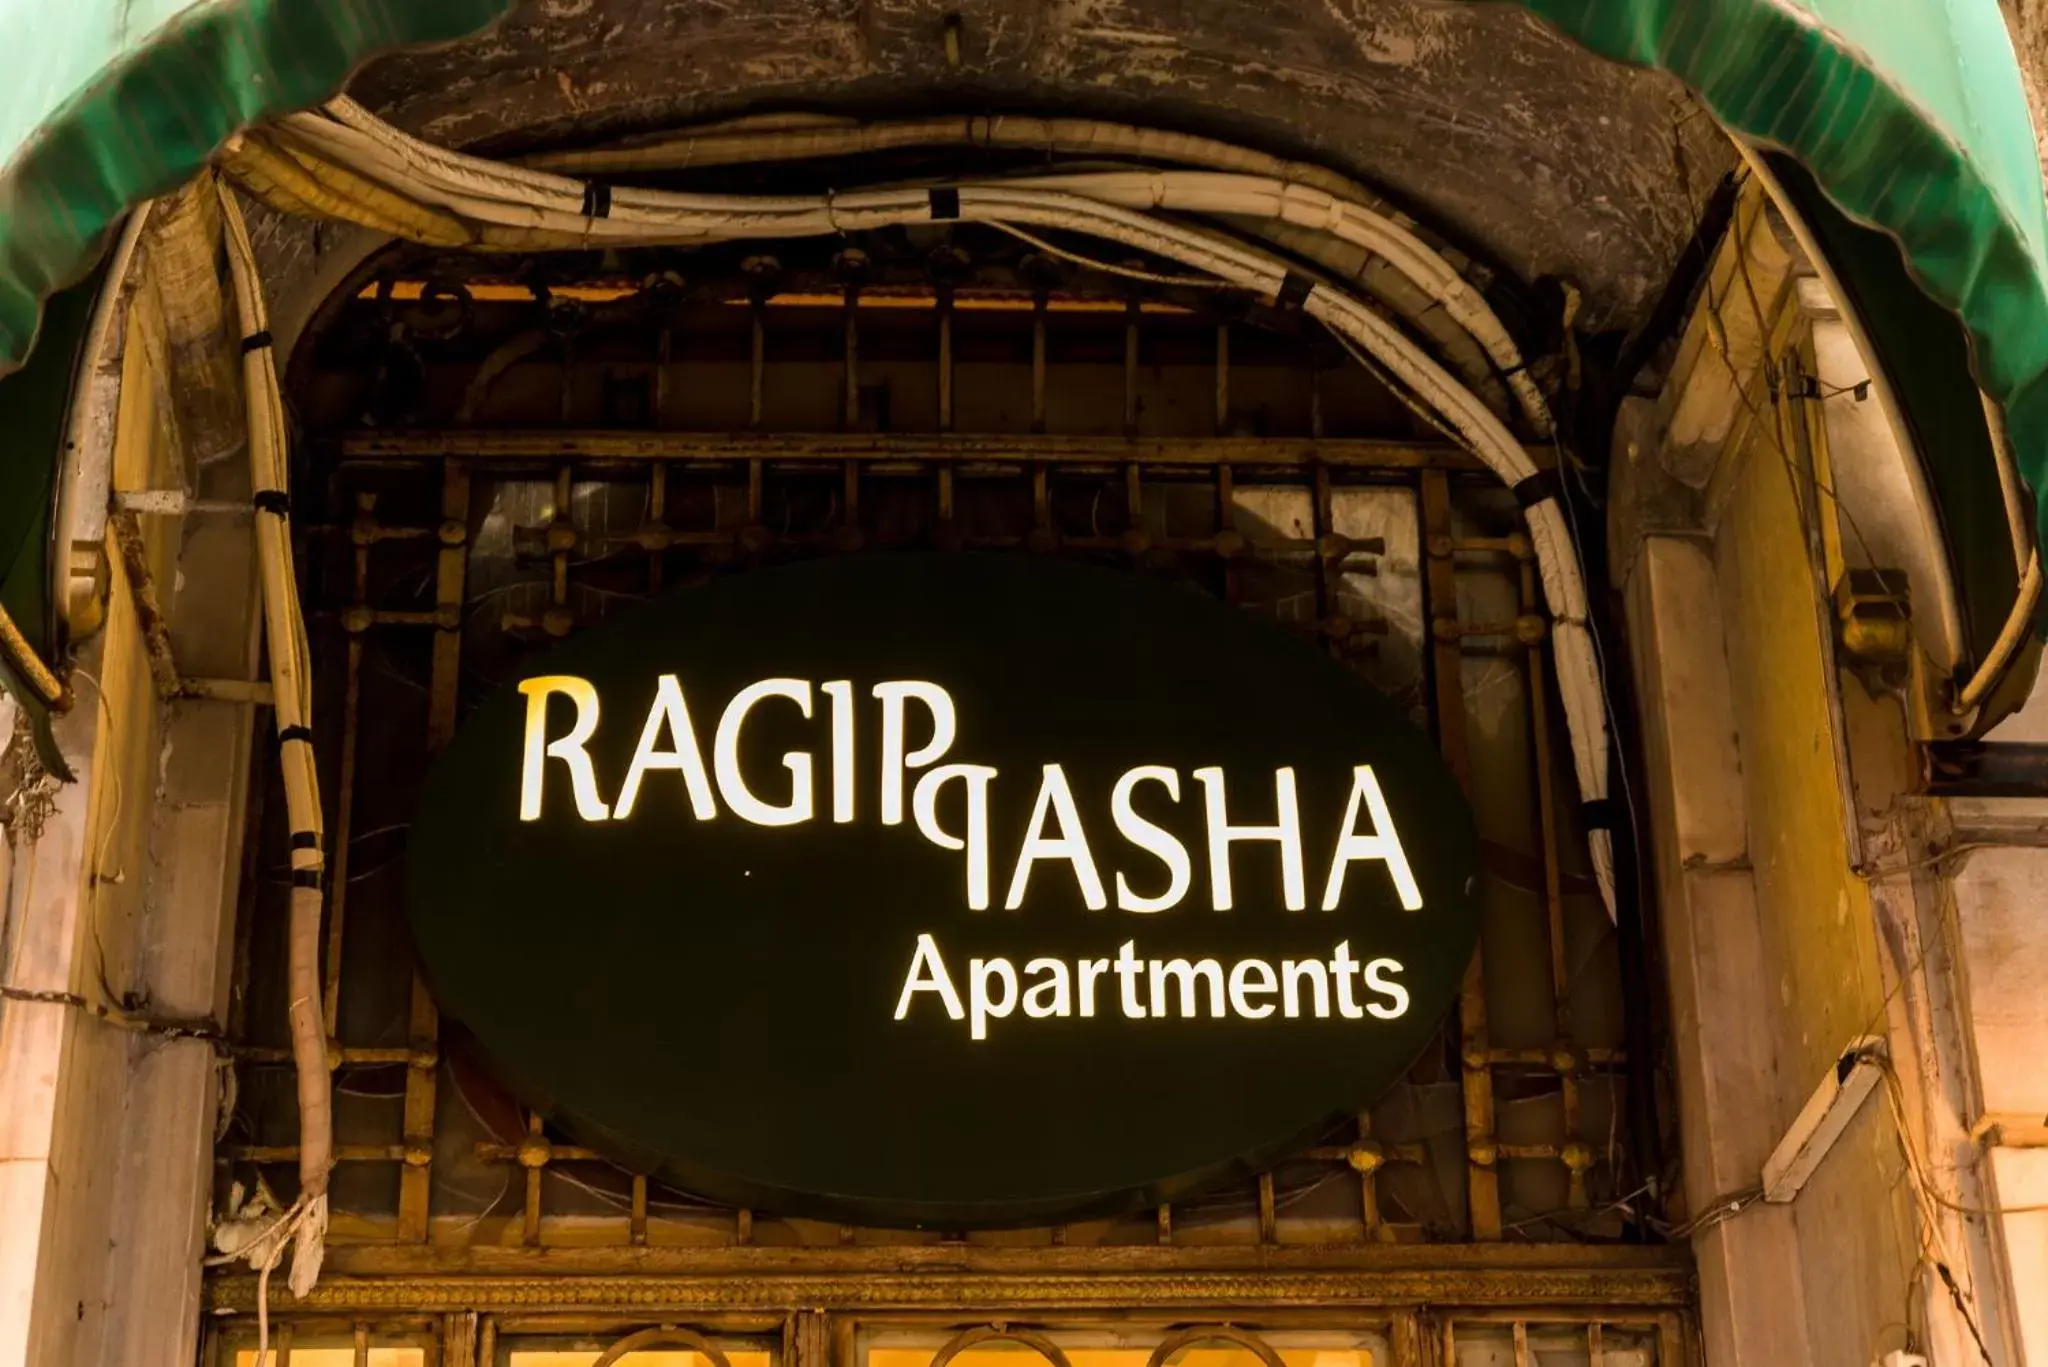 Property logo or sign in Ragip Pasha Apartments